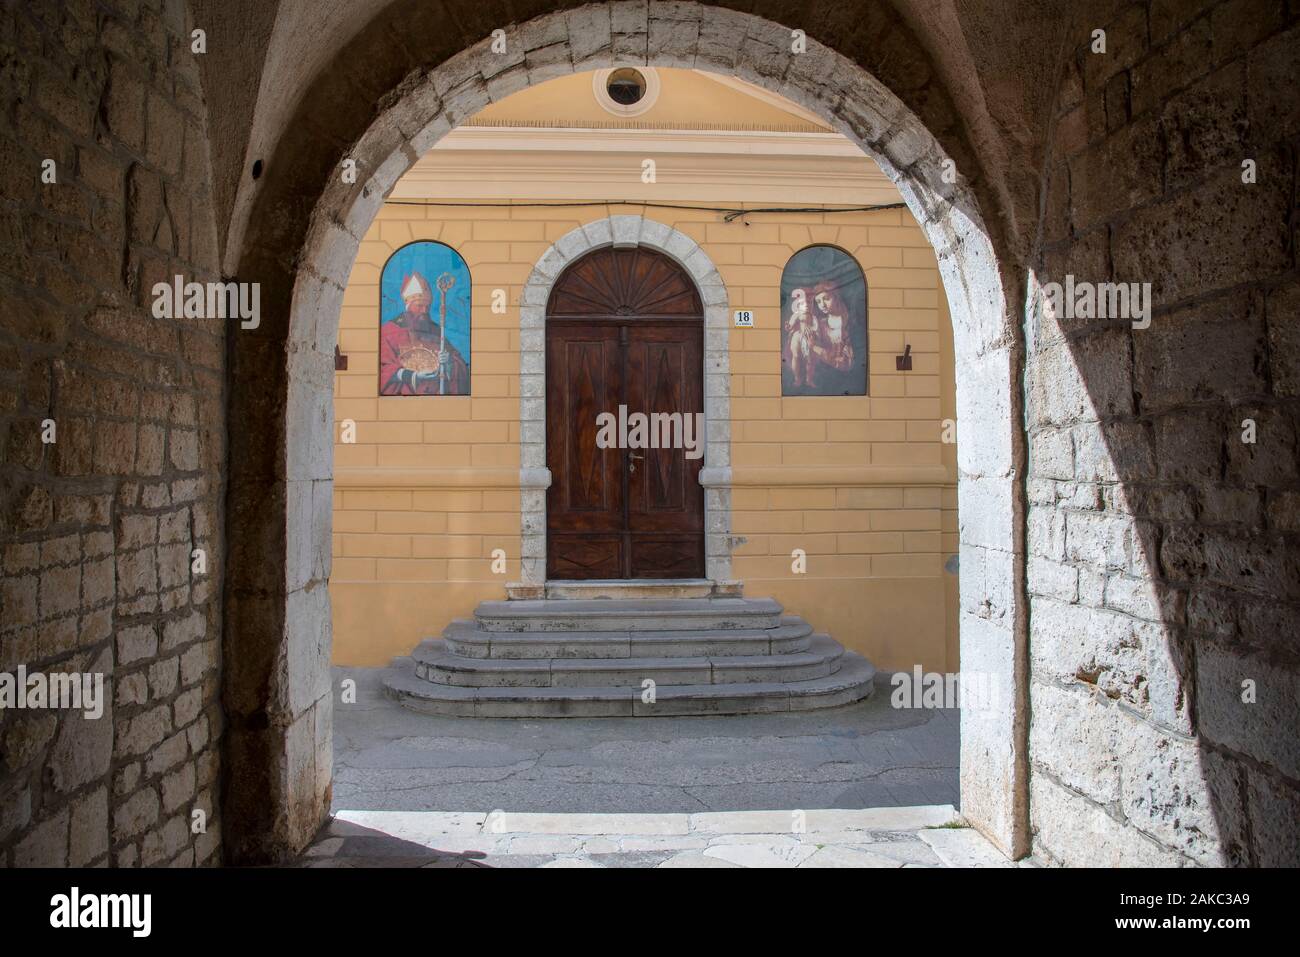 Croatia, County of Primorje-Gorski Kotar, Kvarneric bay, Krk island, Krk city, in the historical city a passage vault connects the Mahnica street with the place saint Quirin and the entrance of the church Stock Photo